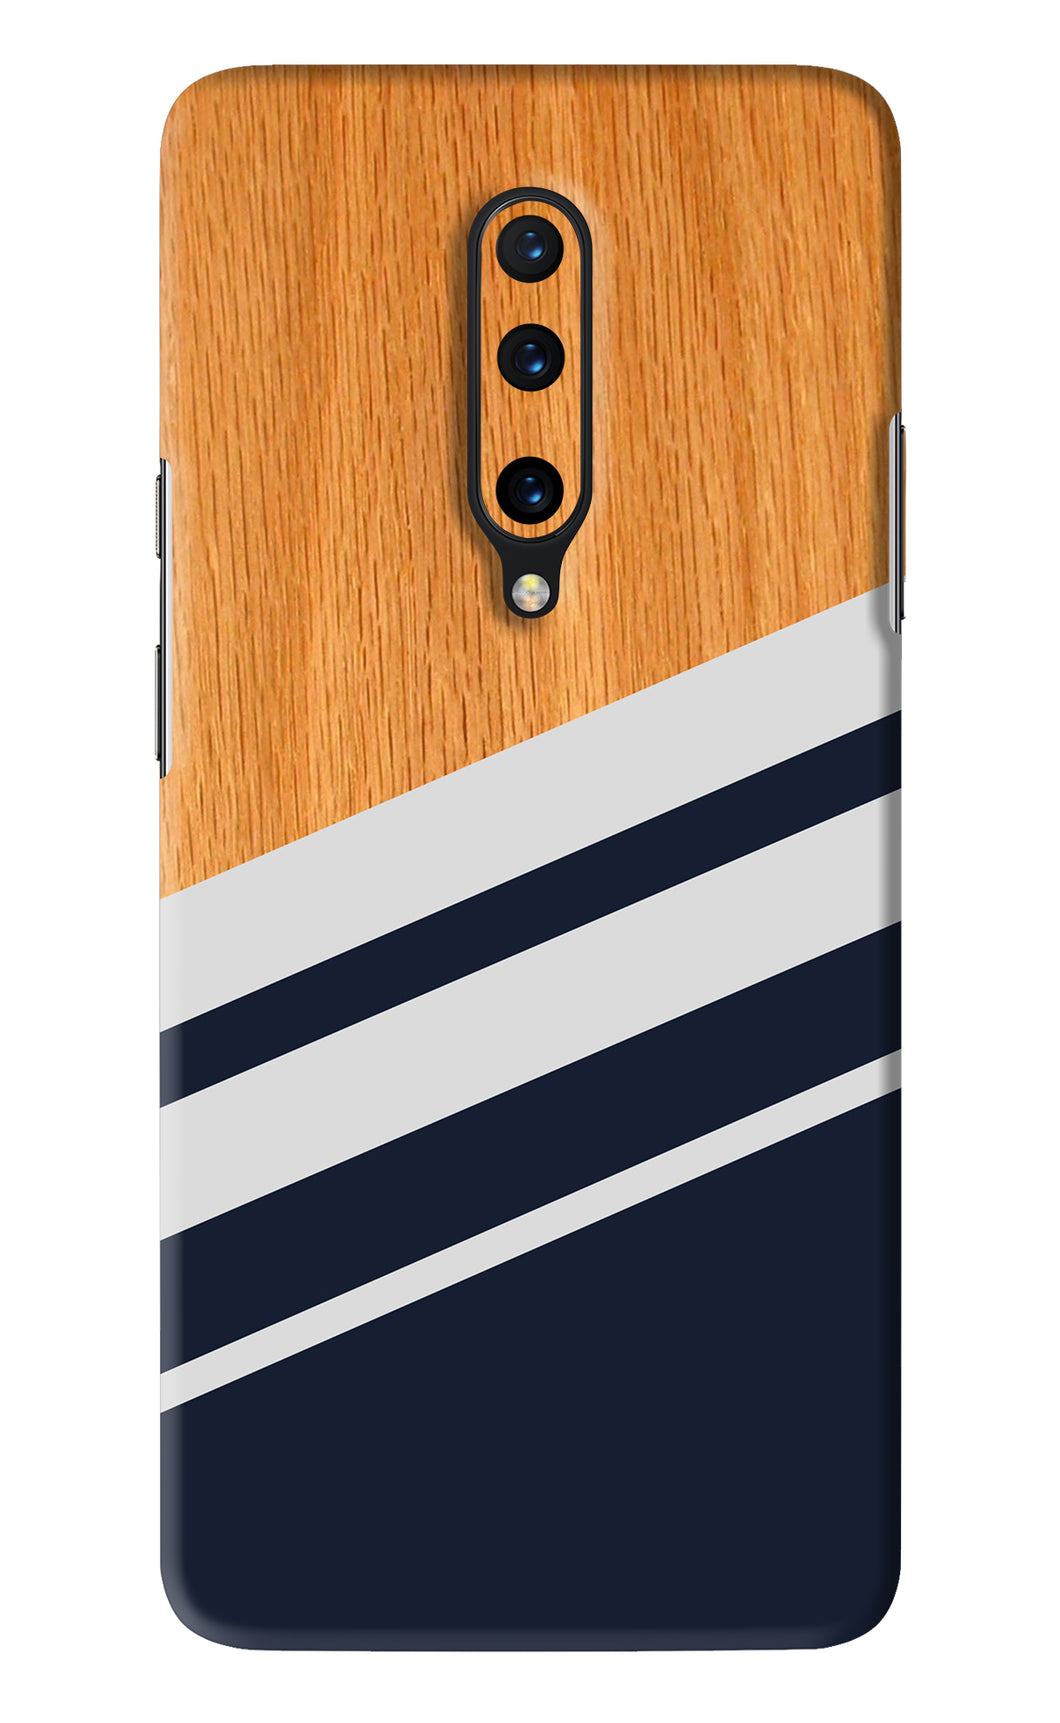 Black And White Wooden OnePlus 7 Pro Back Skin Wrap